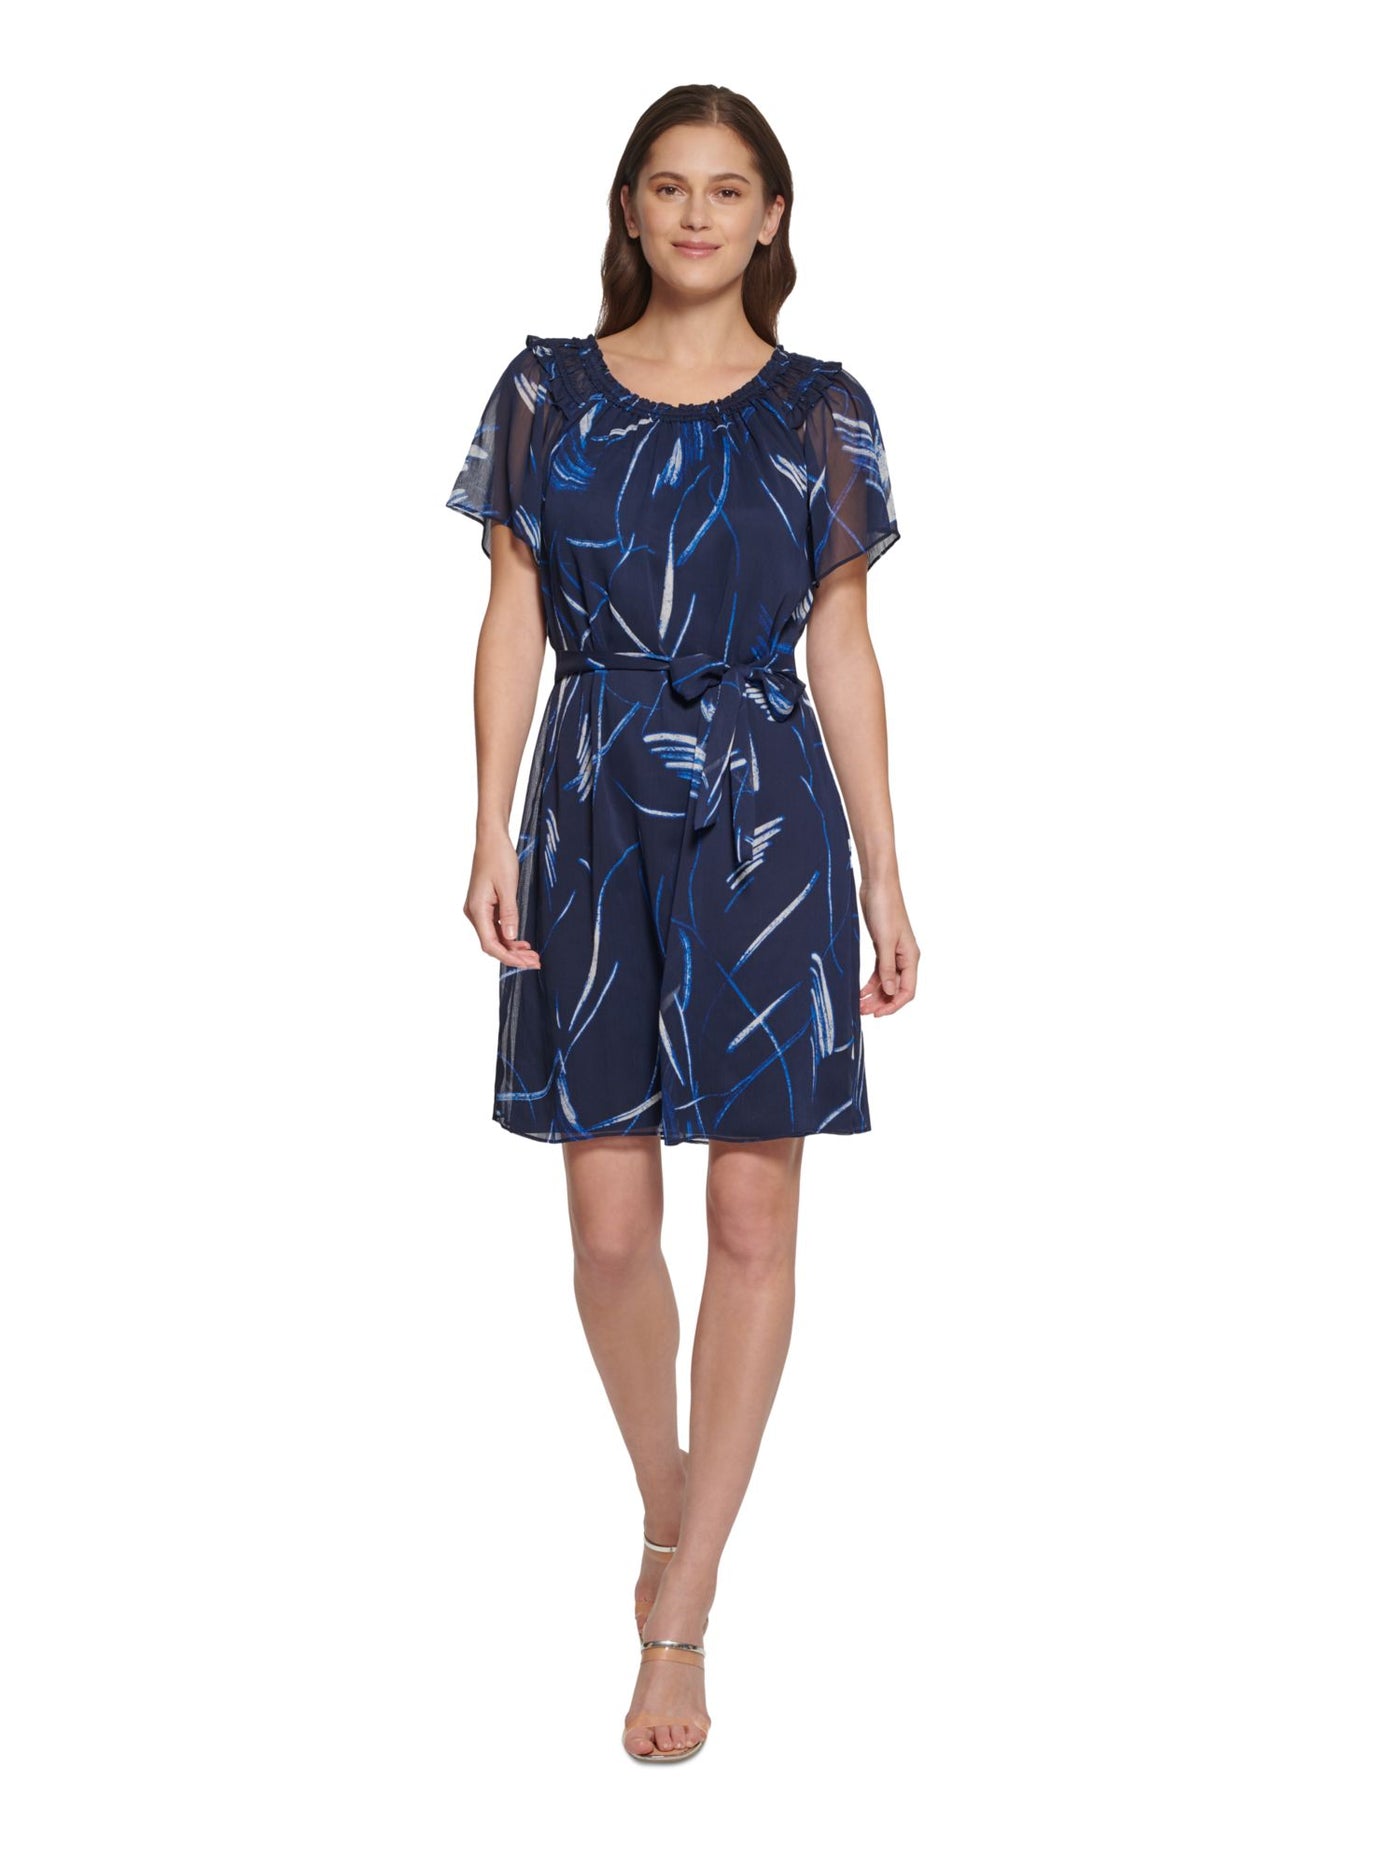 DKNY Womens Navy Ruffled Sheer Tie Belt Lined Printed Short Sleeve Scoop Neck Above The Knee Fit + Flare Dress 16